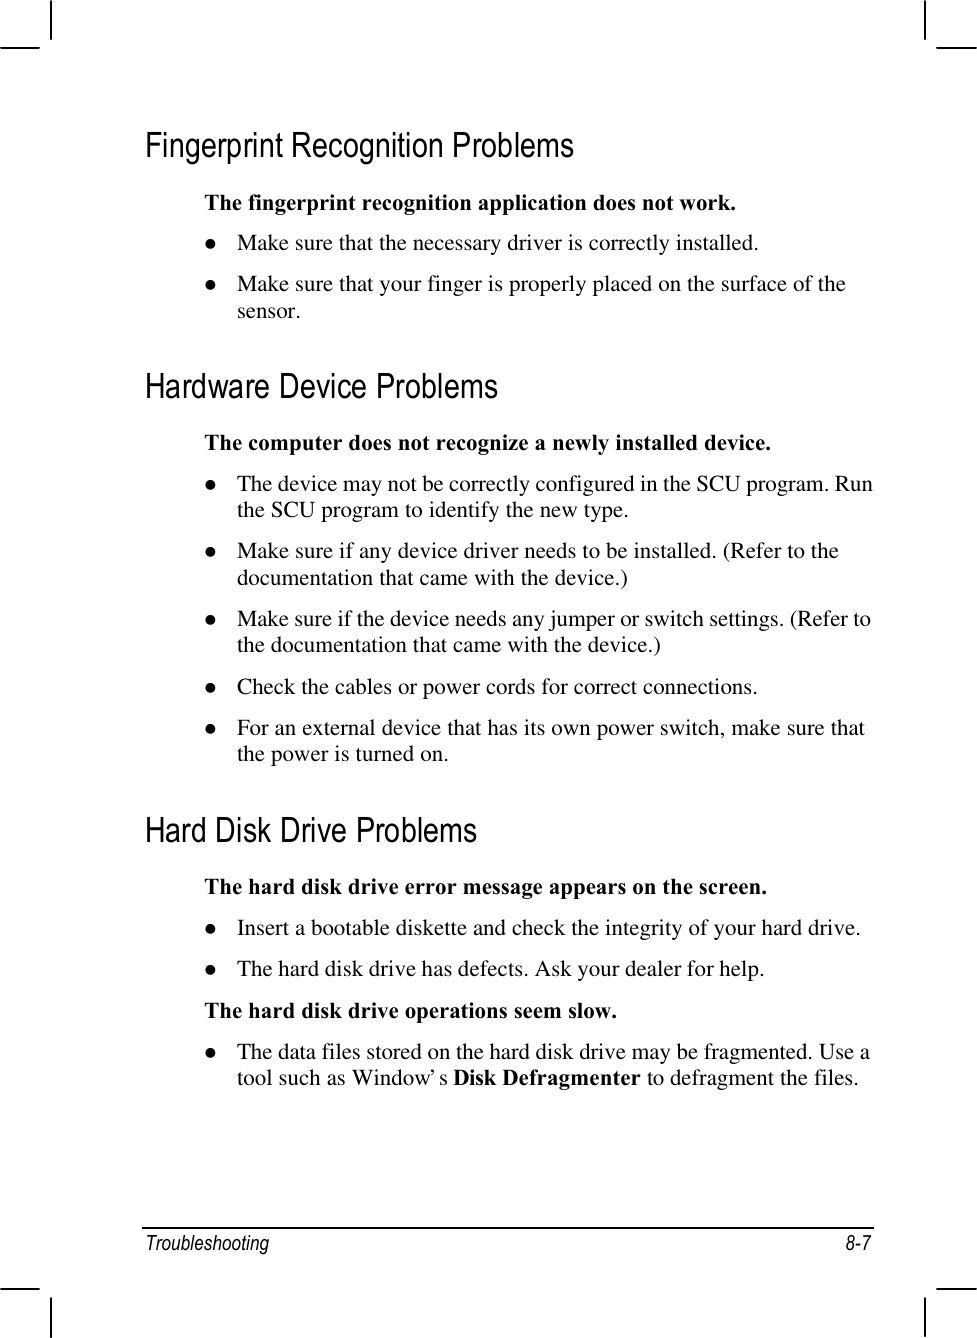 Troubleshooting 8-7Fingerprint Recognition ProblemsThe fingerprint recognition application does not work.l Make sure that the necessary driver is correctly installed.l Make sure that your finger is properly placed on the surface of thesensor.Hardware Device ProblemsThe computer does not recognize a newly installed device.l The device may not be correctly configured in the SCU program. Runthe SCU program to identify the new type.l Make sure if any device driver needs to be installed. (Refer to thedocumentation that came with the device.)l Make sure if the device needs any jumper or switch settings. (Refer tothe documentation that came with the device.)l Check the cables or power cords for correct connections.l For an external device that has its own power switch, make sure thatthe power is turned on.Hard Disk Drive ProblemsThe hard disk drive error message appears on the screen.l Insert a bootable diskette and check the integrity of your hard drive.l The hard disk drive has defects. Ask your dealer for help.The hard disk drive operations seem slow.l The data files stored on the hard disk drive may be fragmented. Use atool such as Window’s Disk Defragmenter to defragment the files.